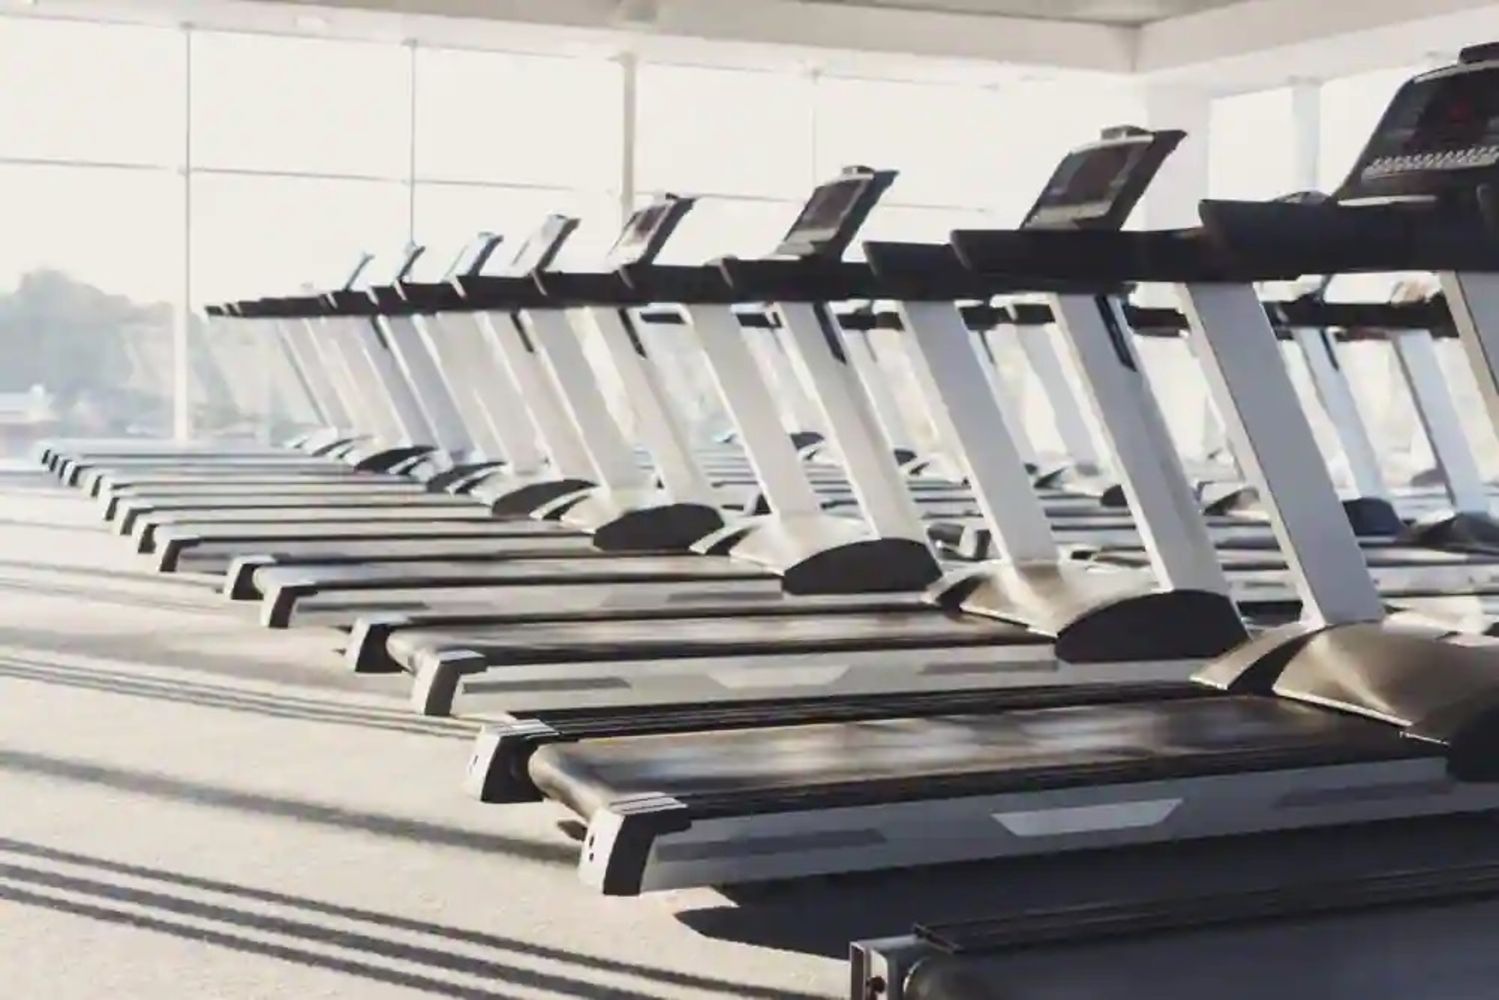 FITNESS & GYM SALE! (Untested) TREADMILLS, CROSS TRAINERS, ROWING MACHINES, EXERCISE BIKES & MORE Ends Friday 27th May From 11am